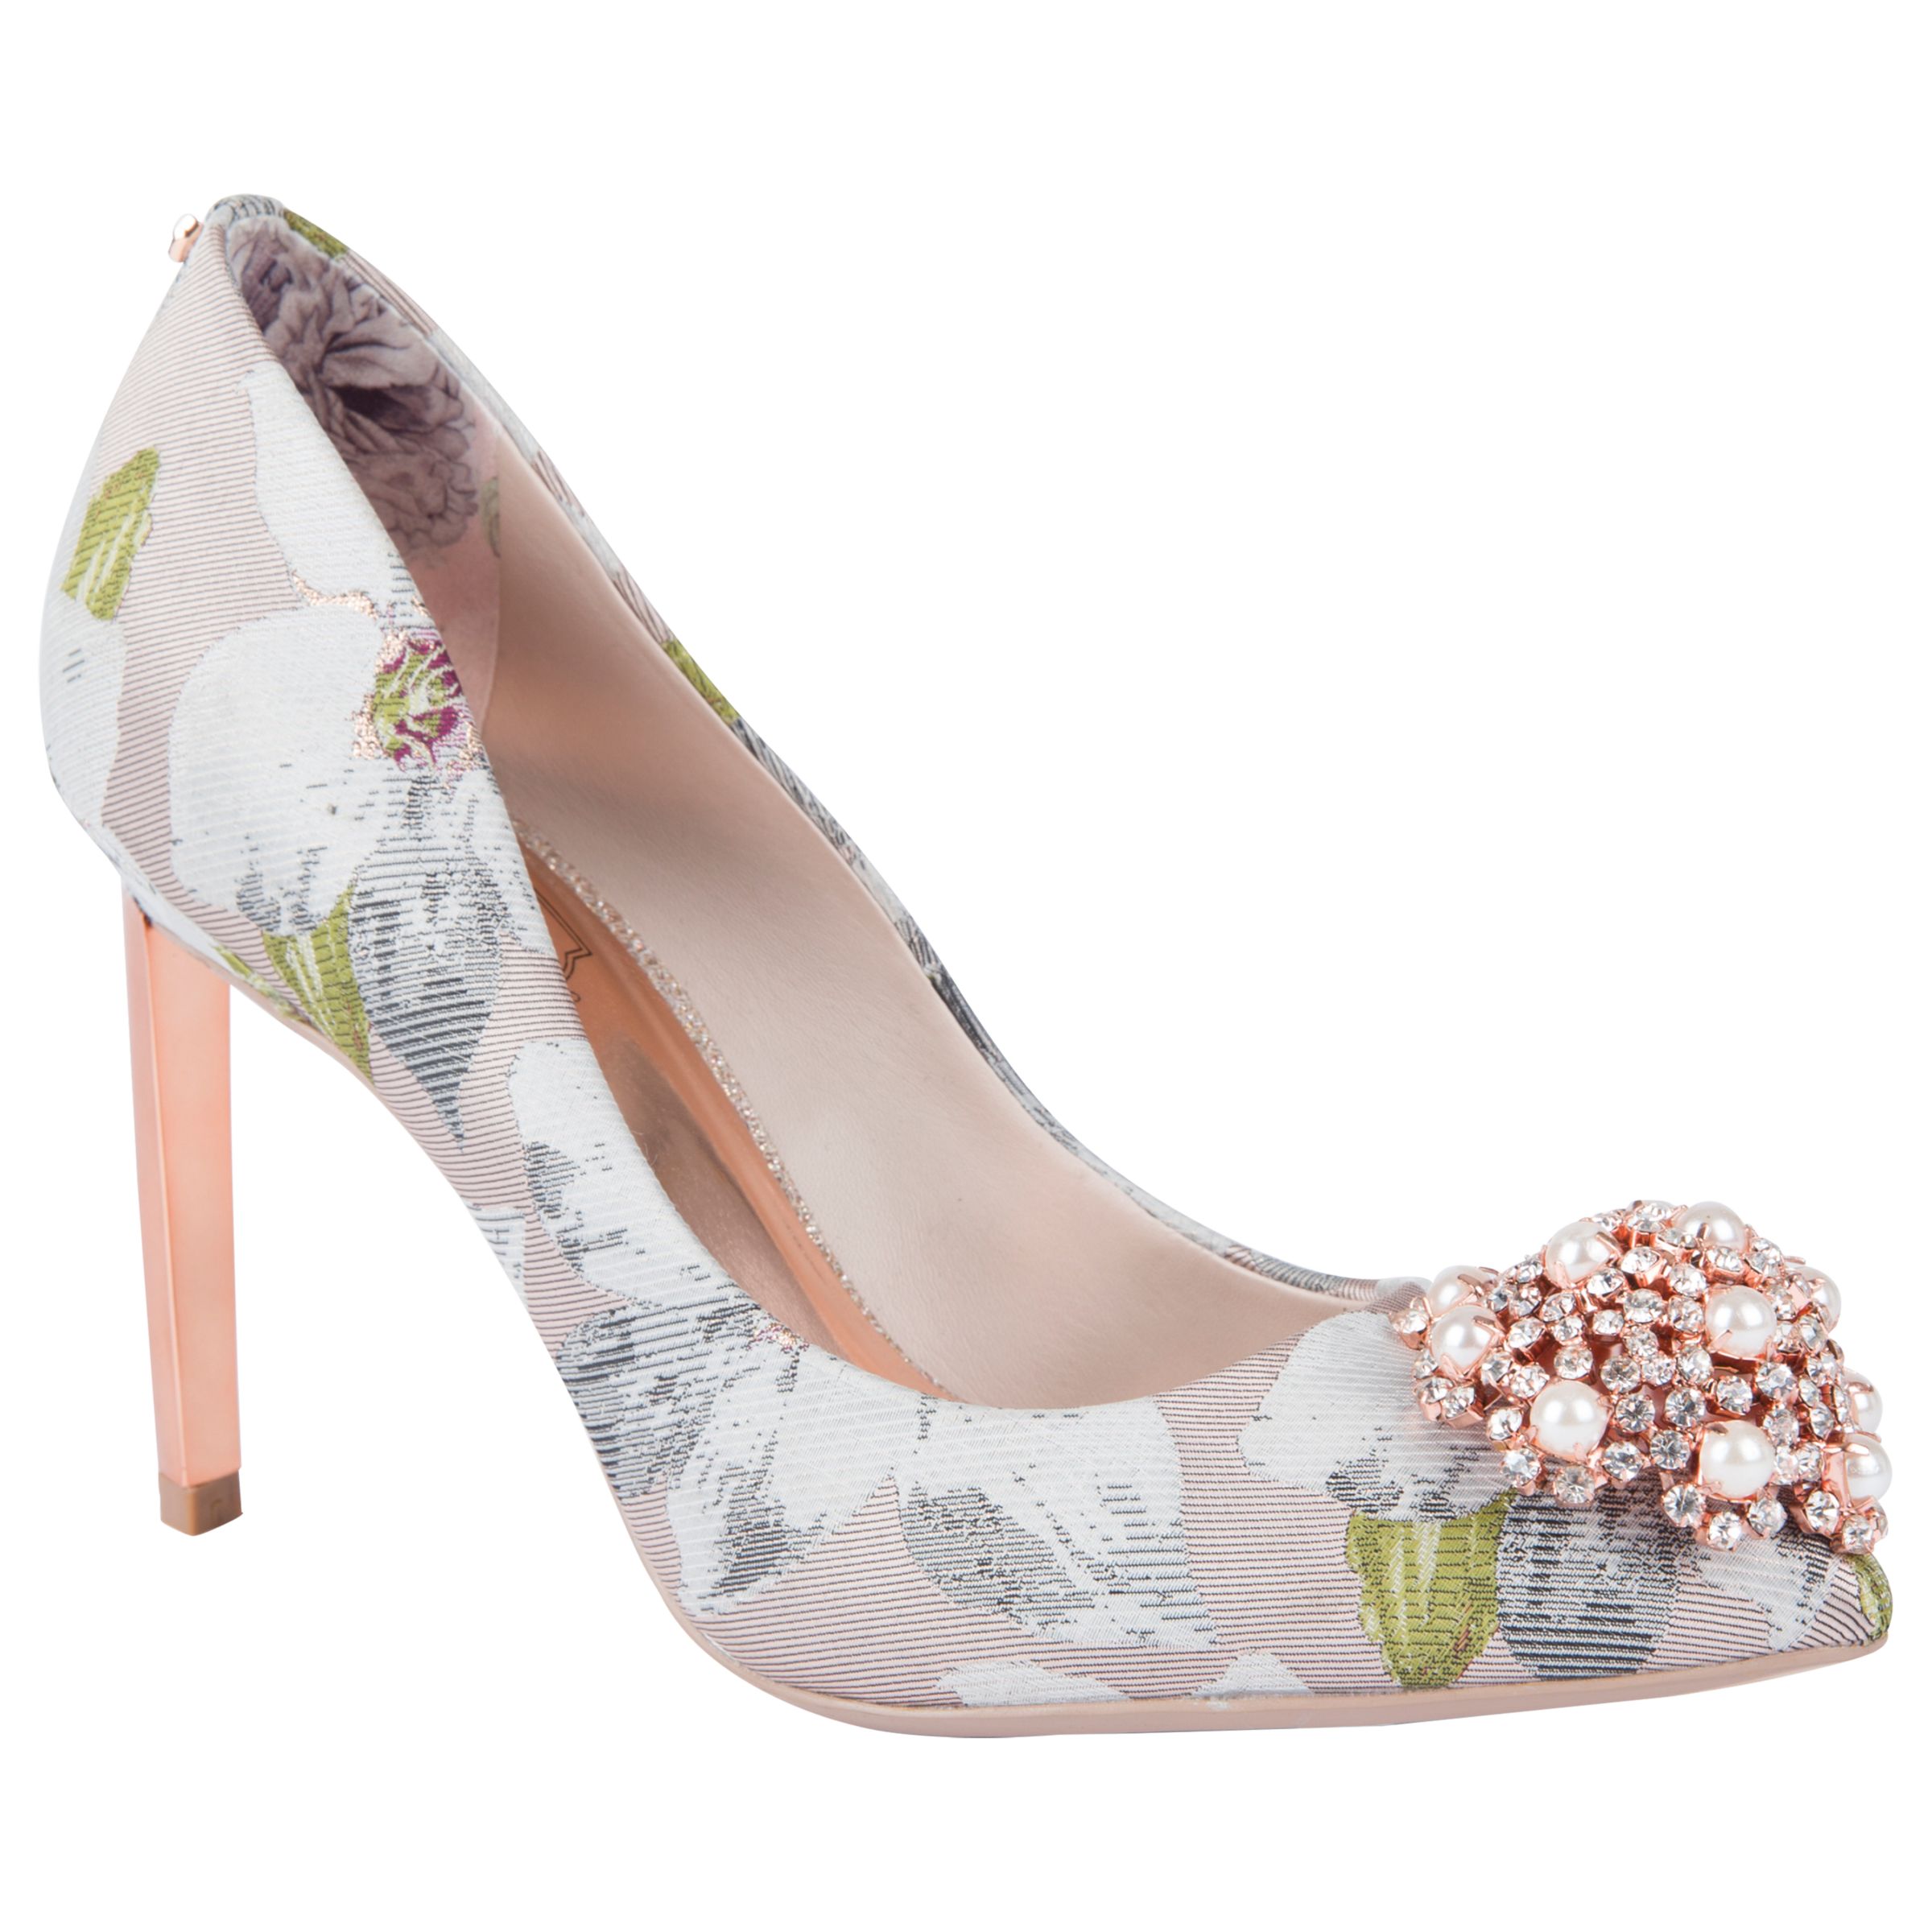 Ted Baker Peetch Chatsworth Jacquard Court Shoes, Multi